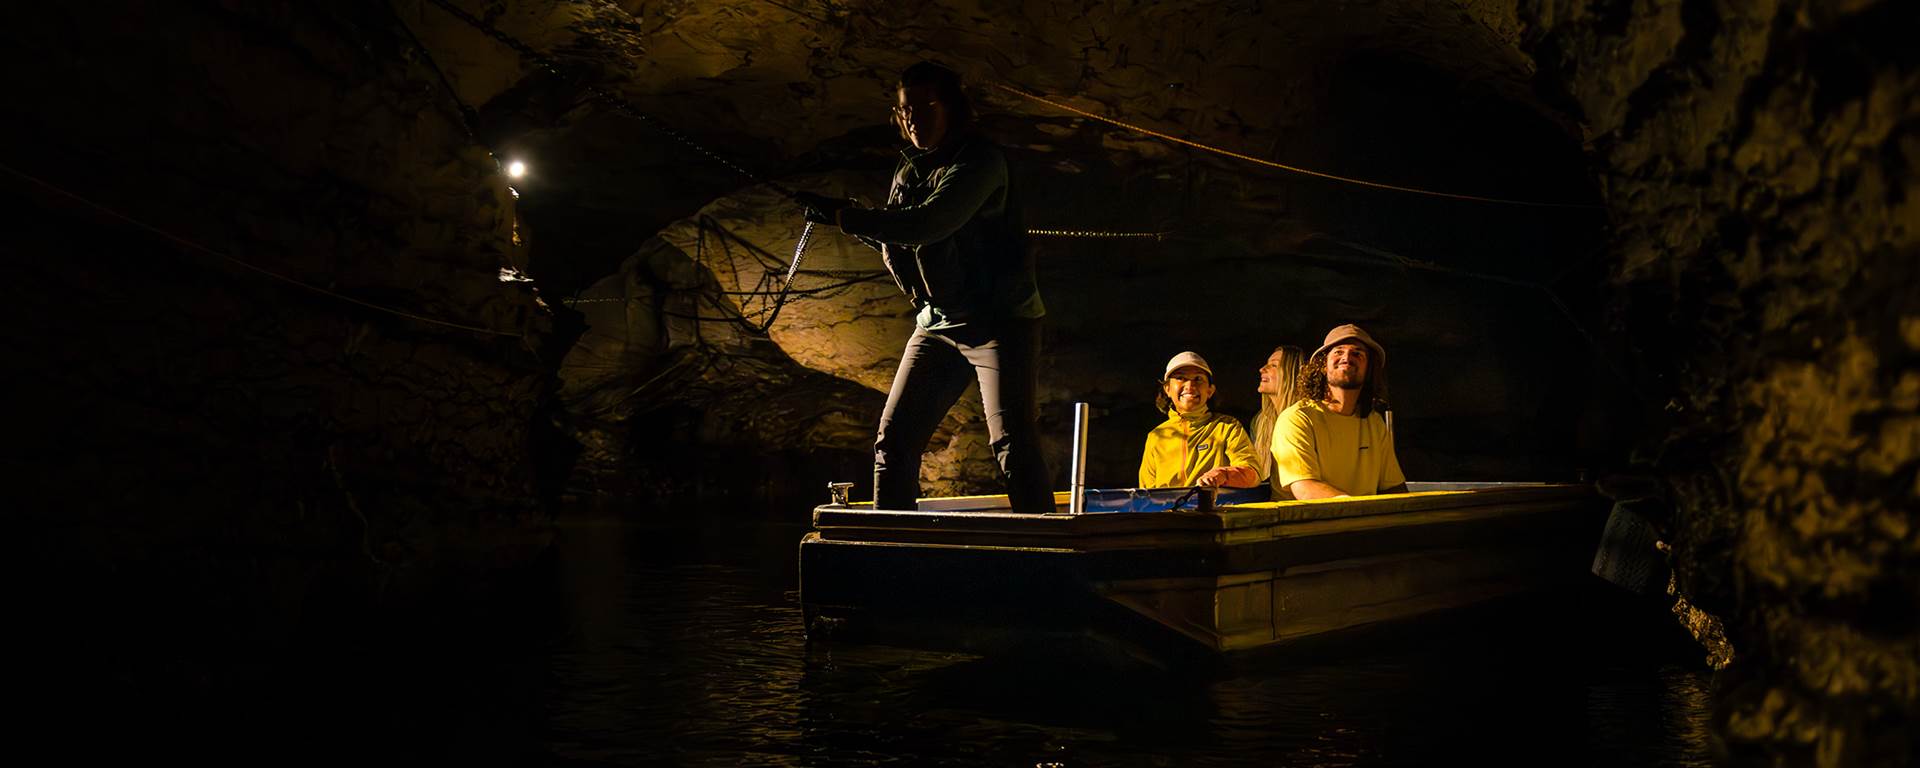 A group of three are guided through an underground cave on a small boat 